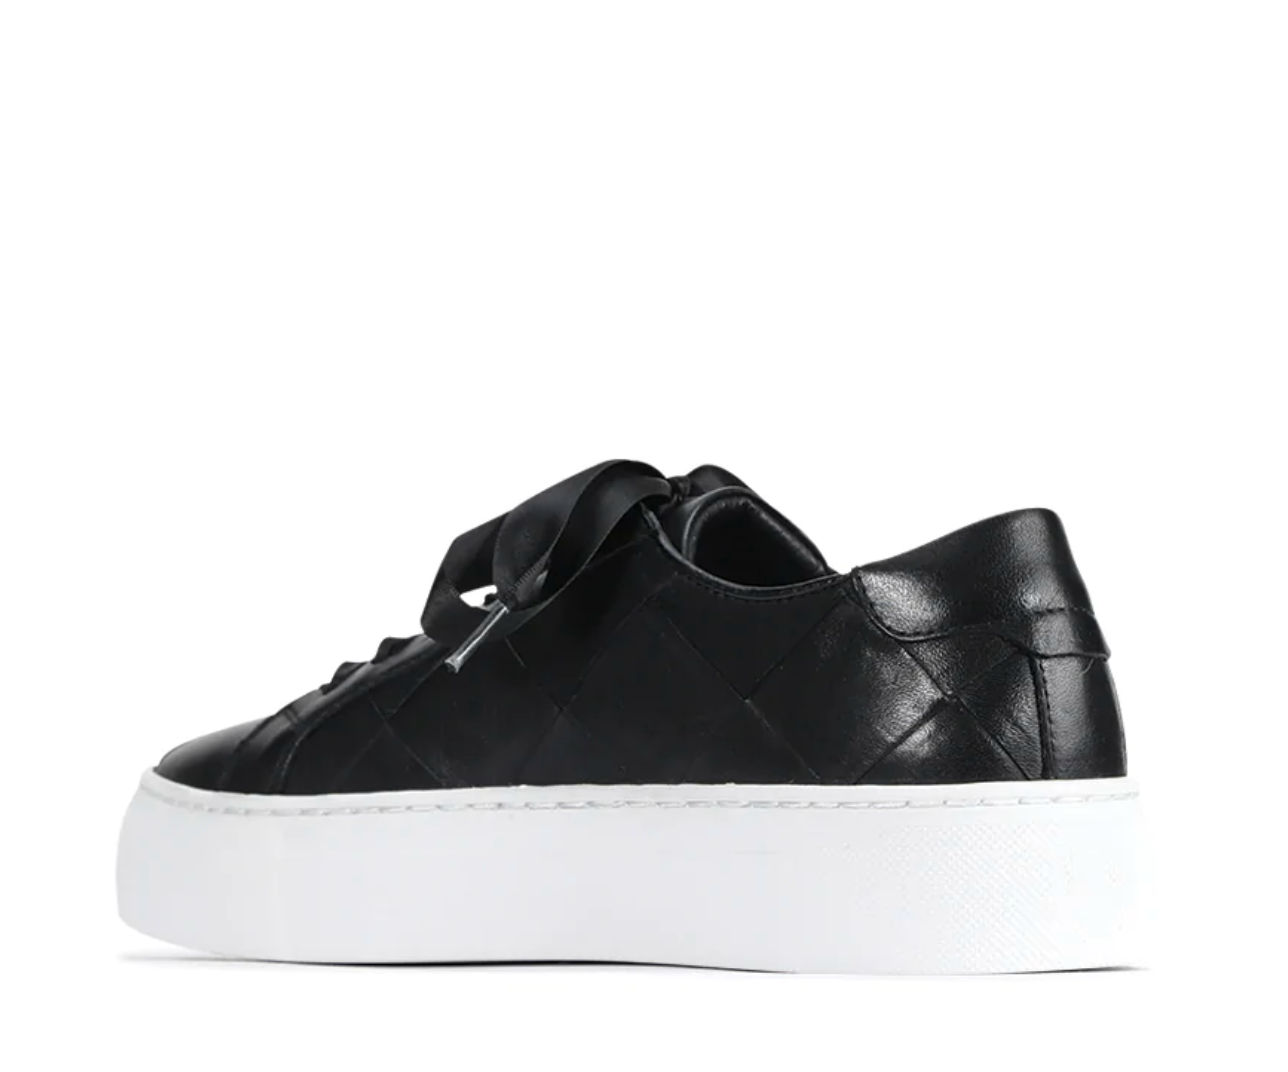 Eos Woven Black - Women sneakers - Collective Shoes 